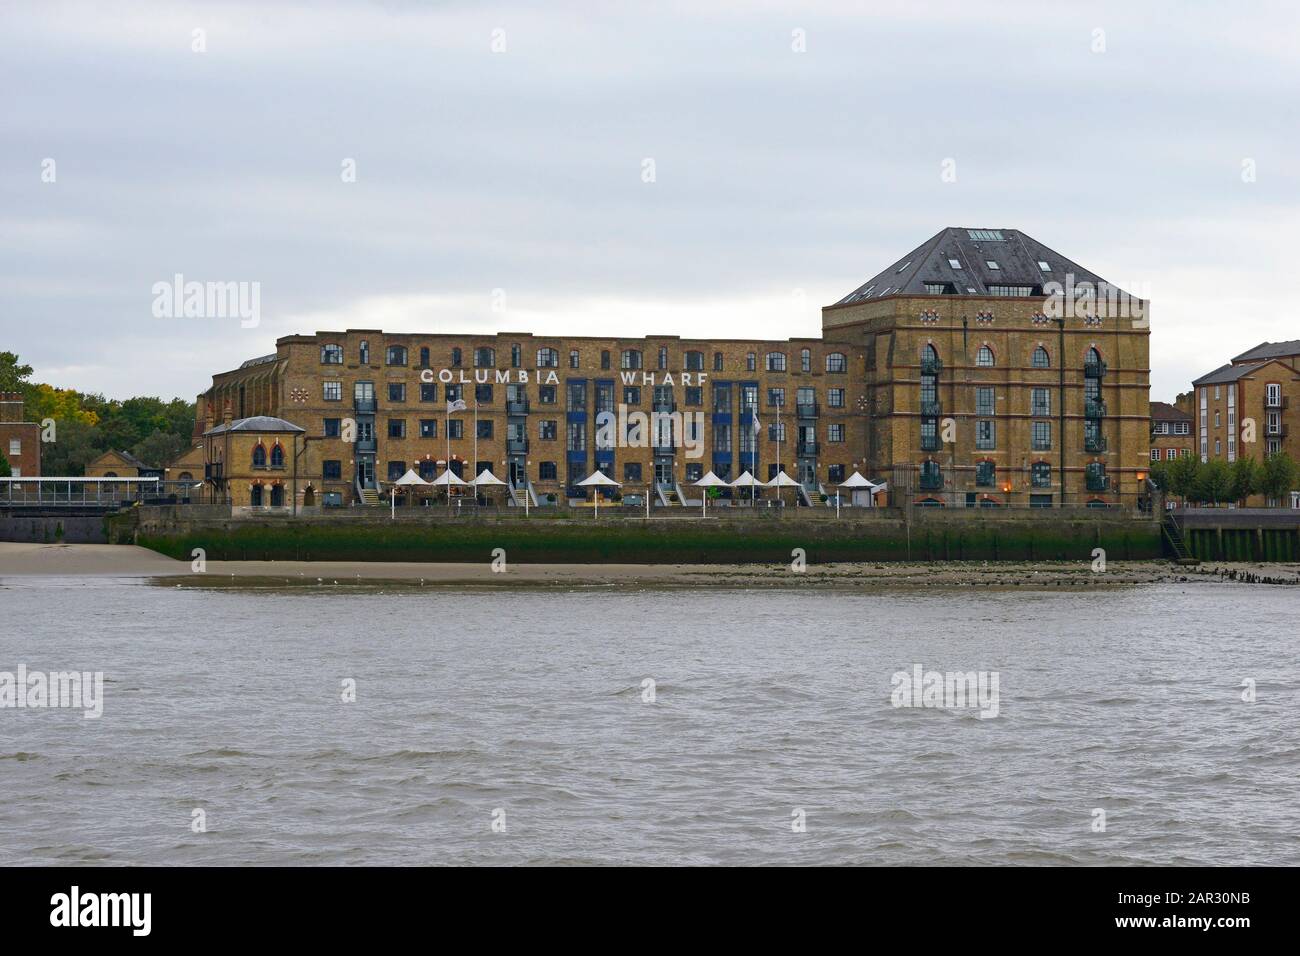 View of the buildings of Nelson dock opposite Canary Wharf on the southern bank of the river Thames, London, UK Stock Photo